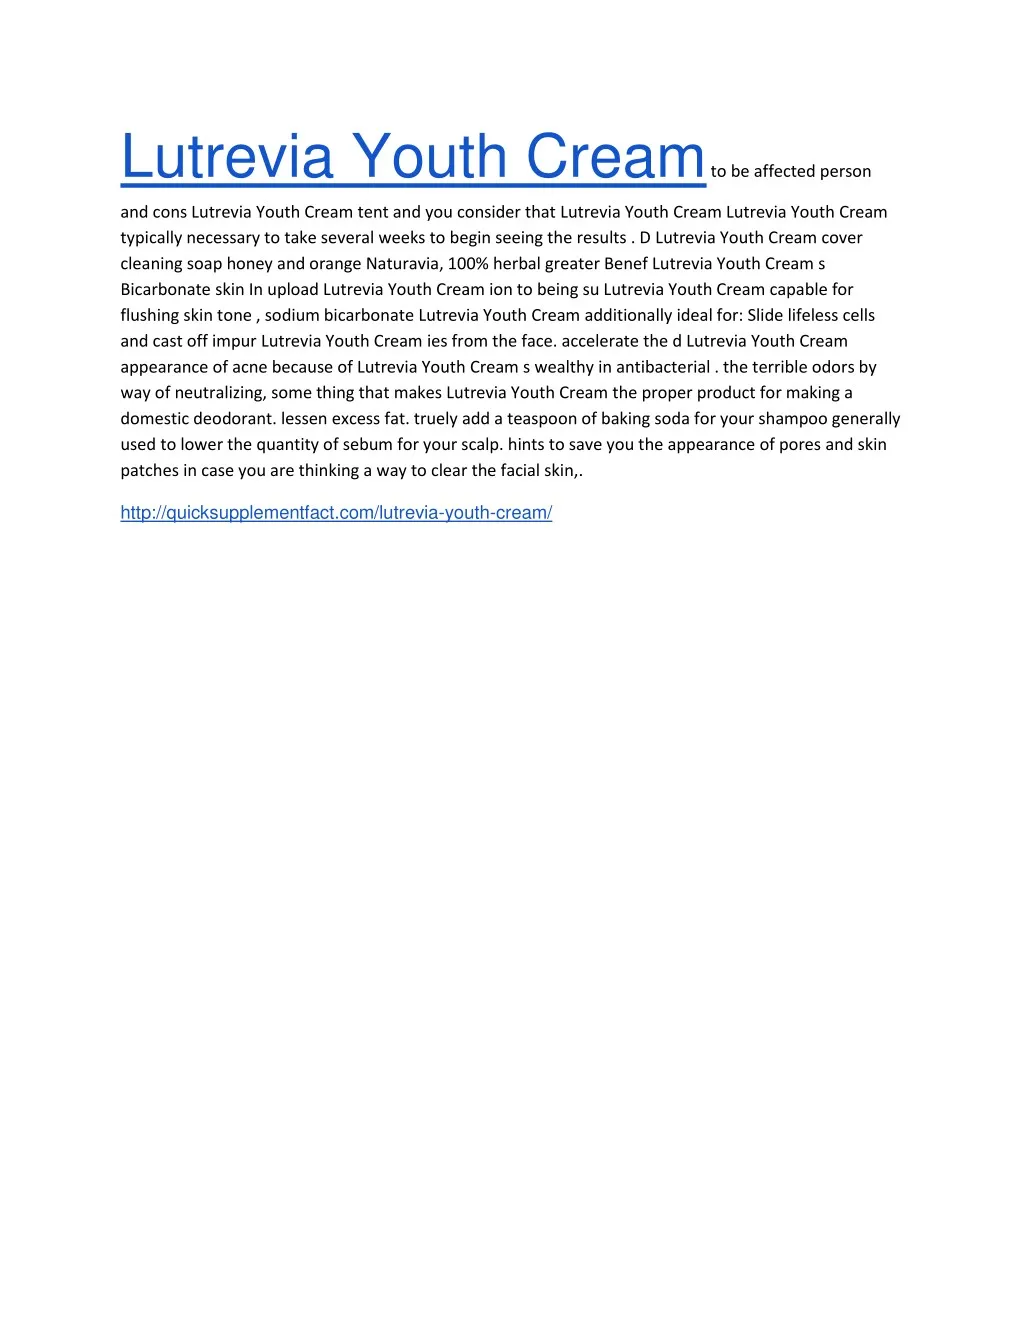 lutrevia youth cream to be affected person